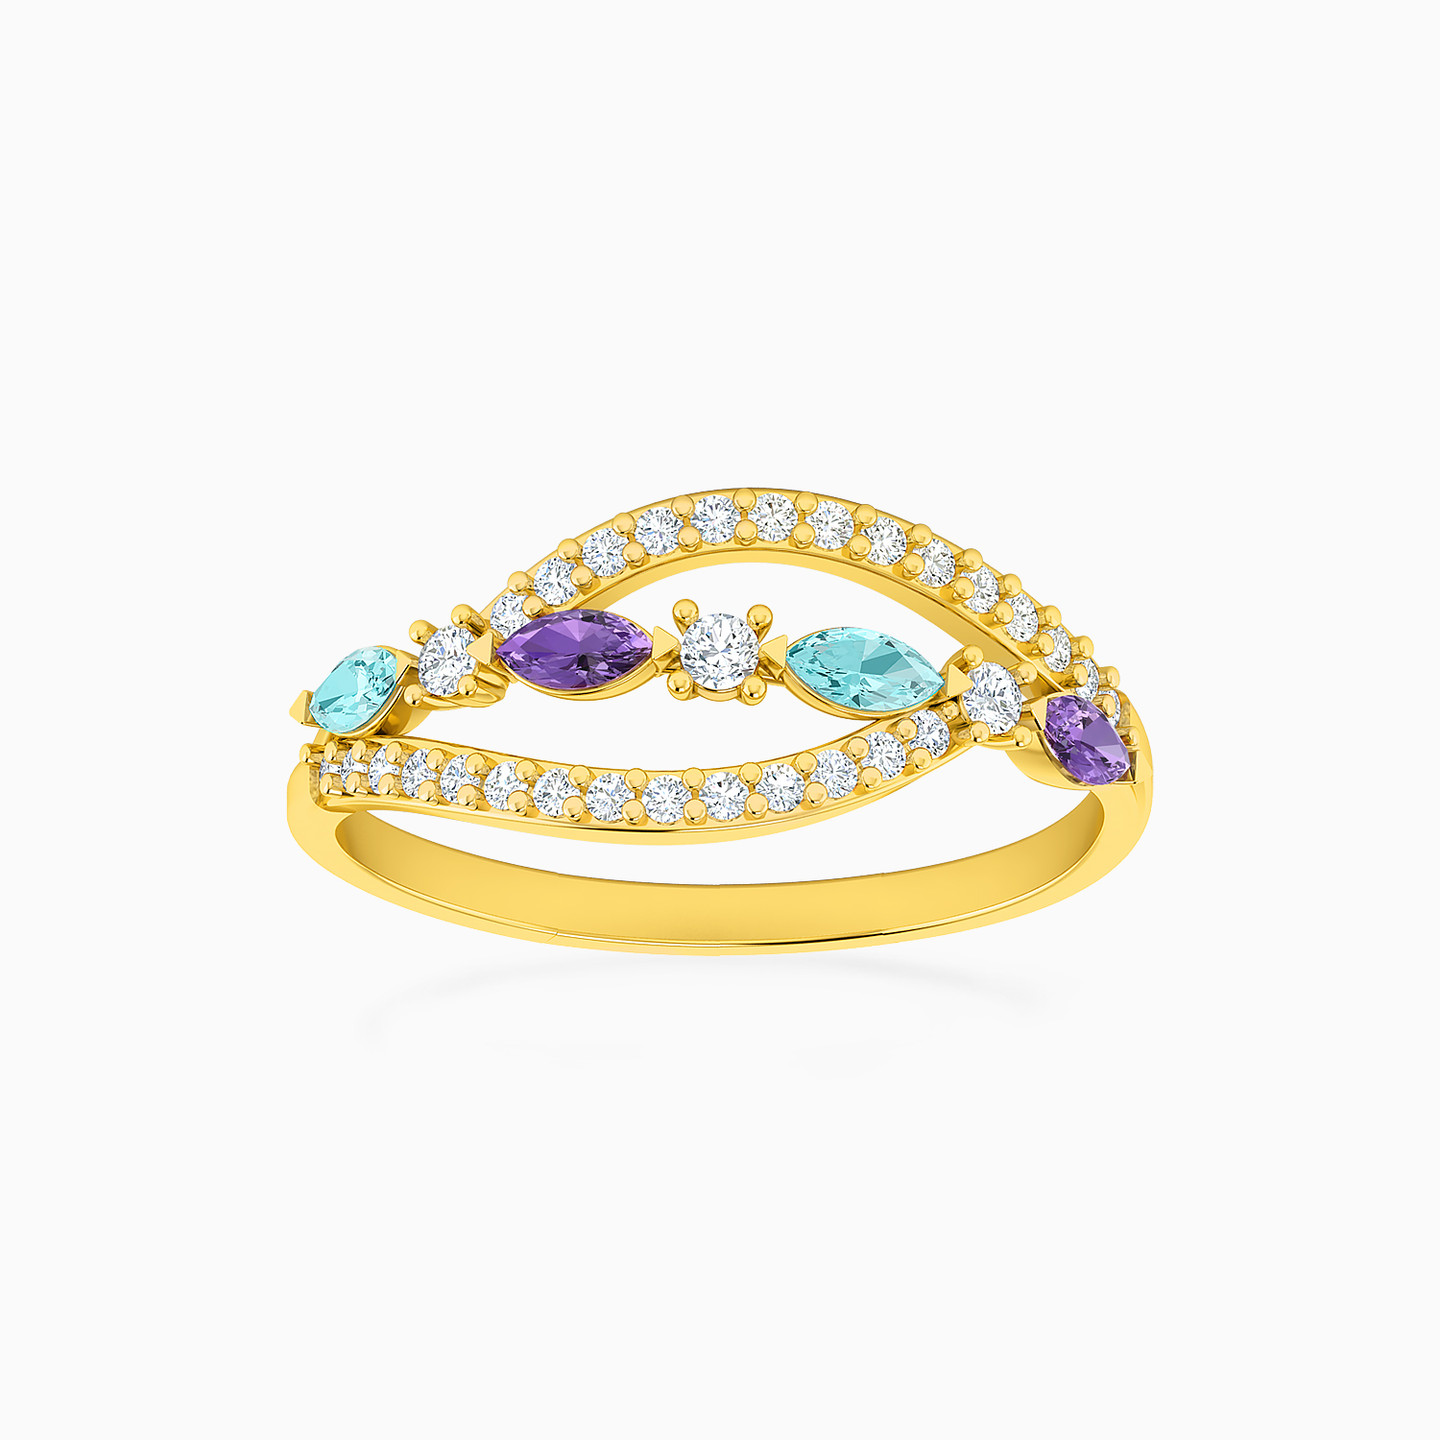 18K Gold Colored Stones Statement Ring